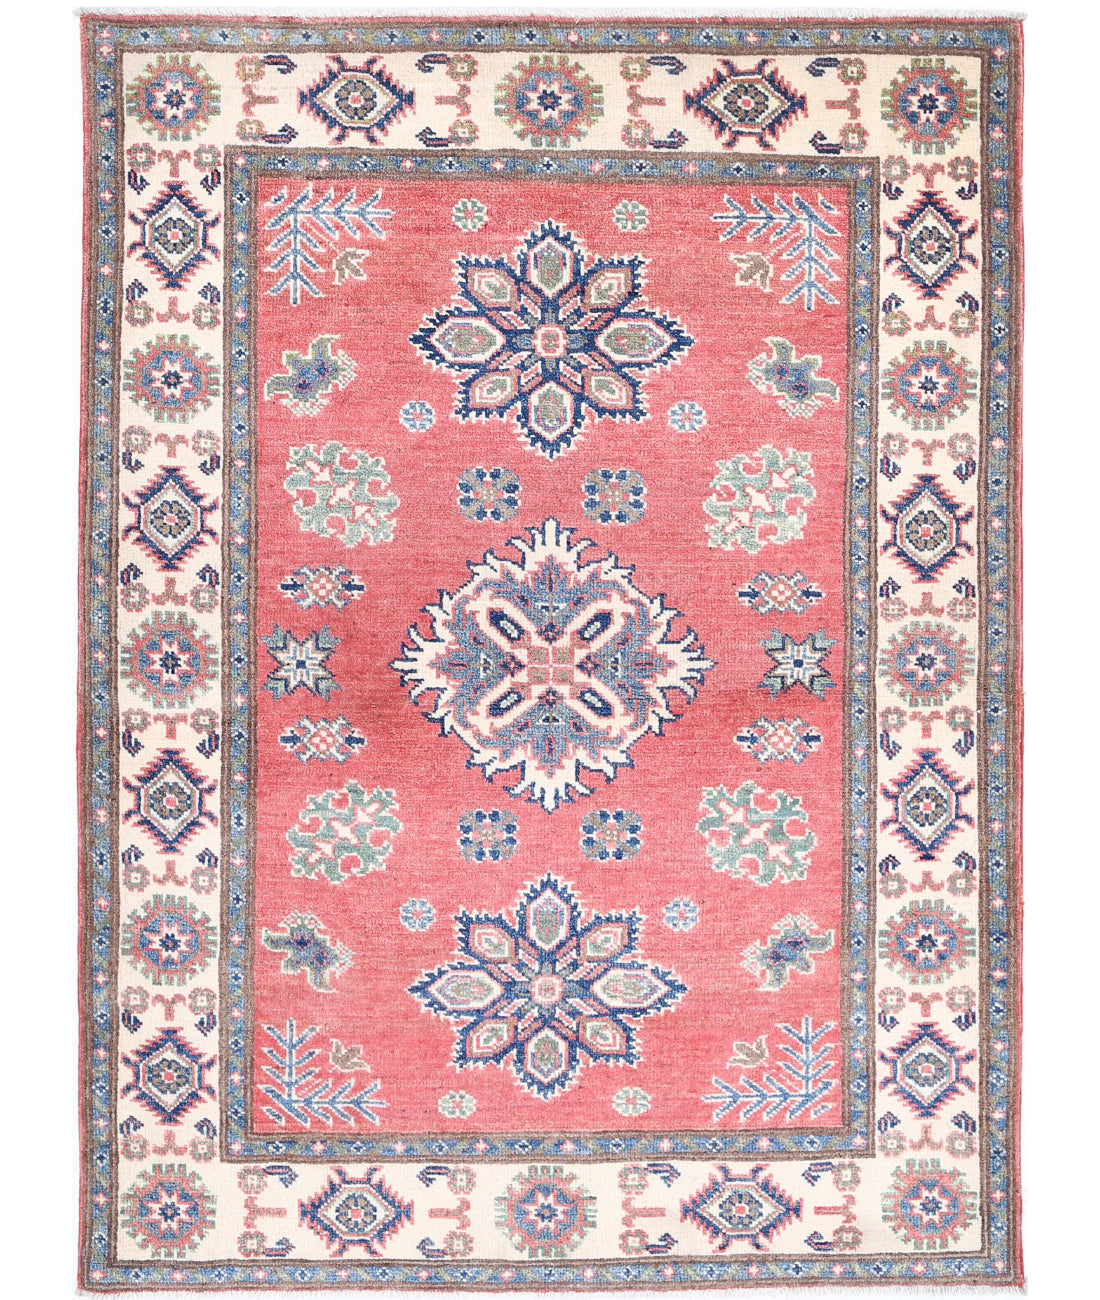 Hand Knotted Tribal Kazak Wool Rug - 3'4'' x 4'7'' 3'4'' x 4'7'' (100 X 138) / Red / Ivory